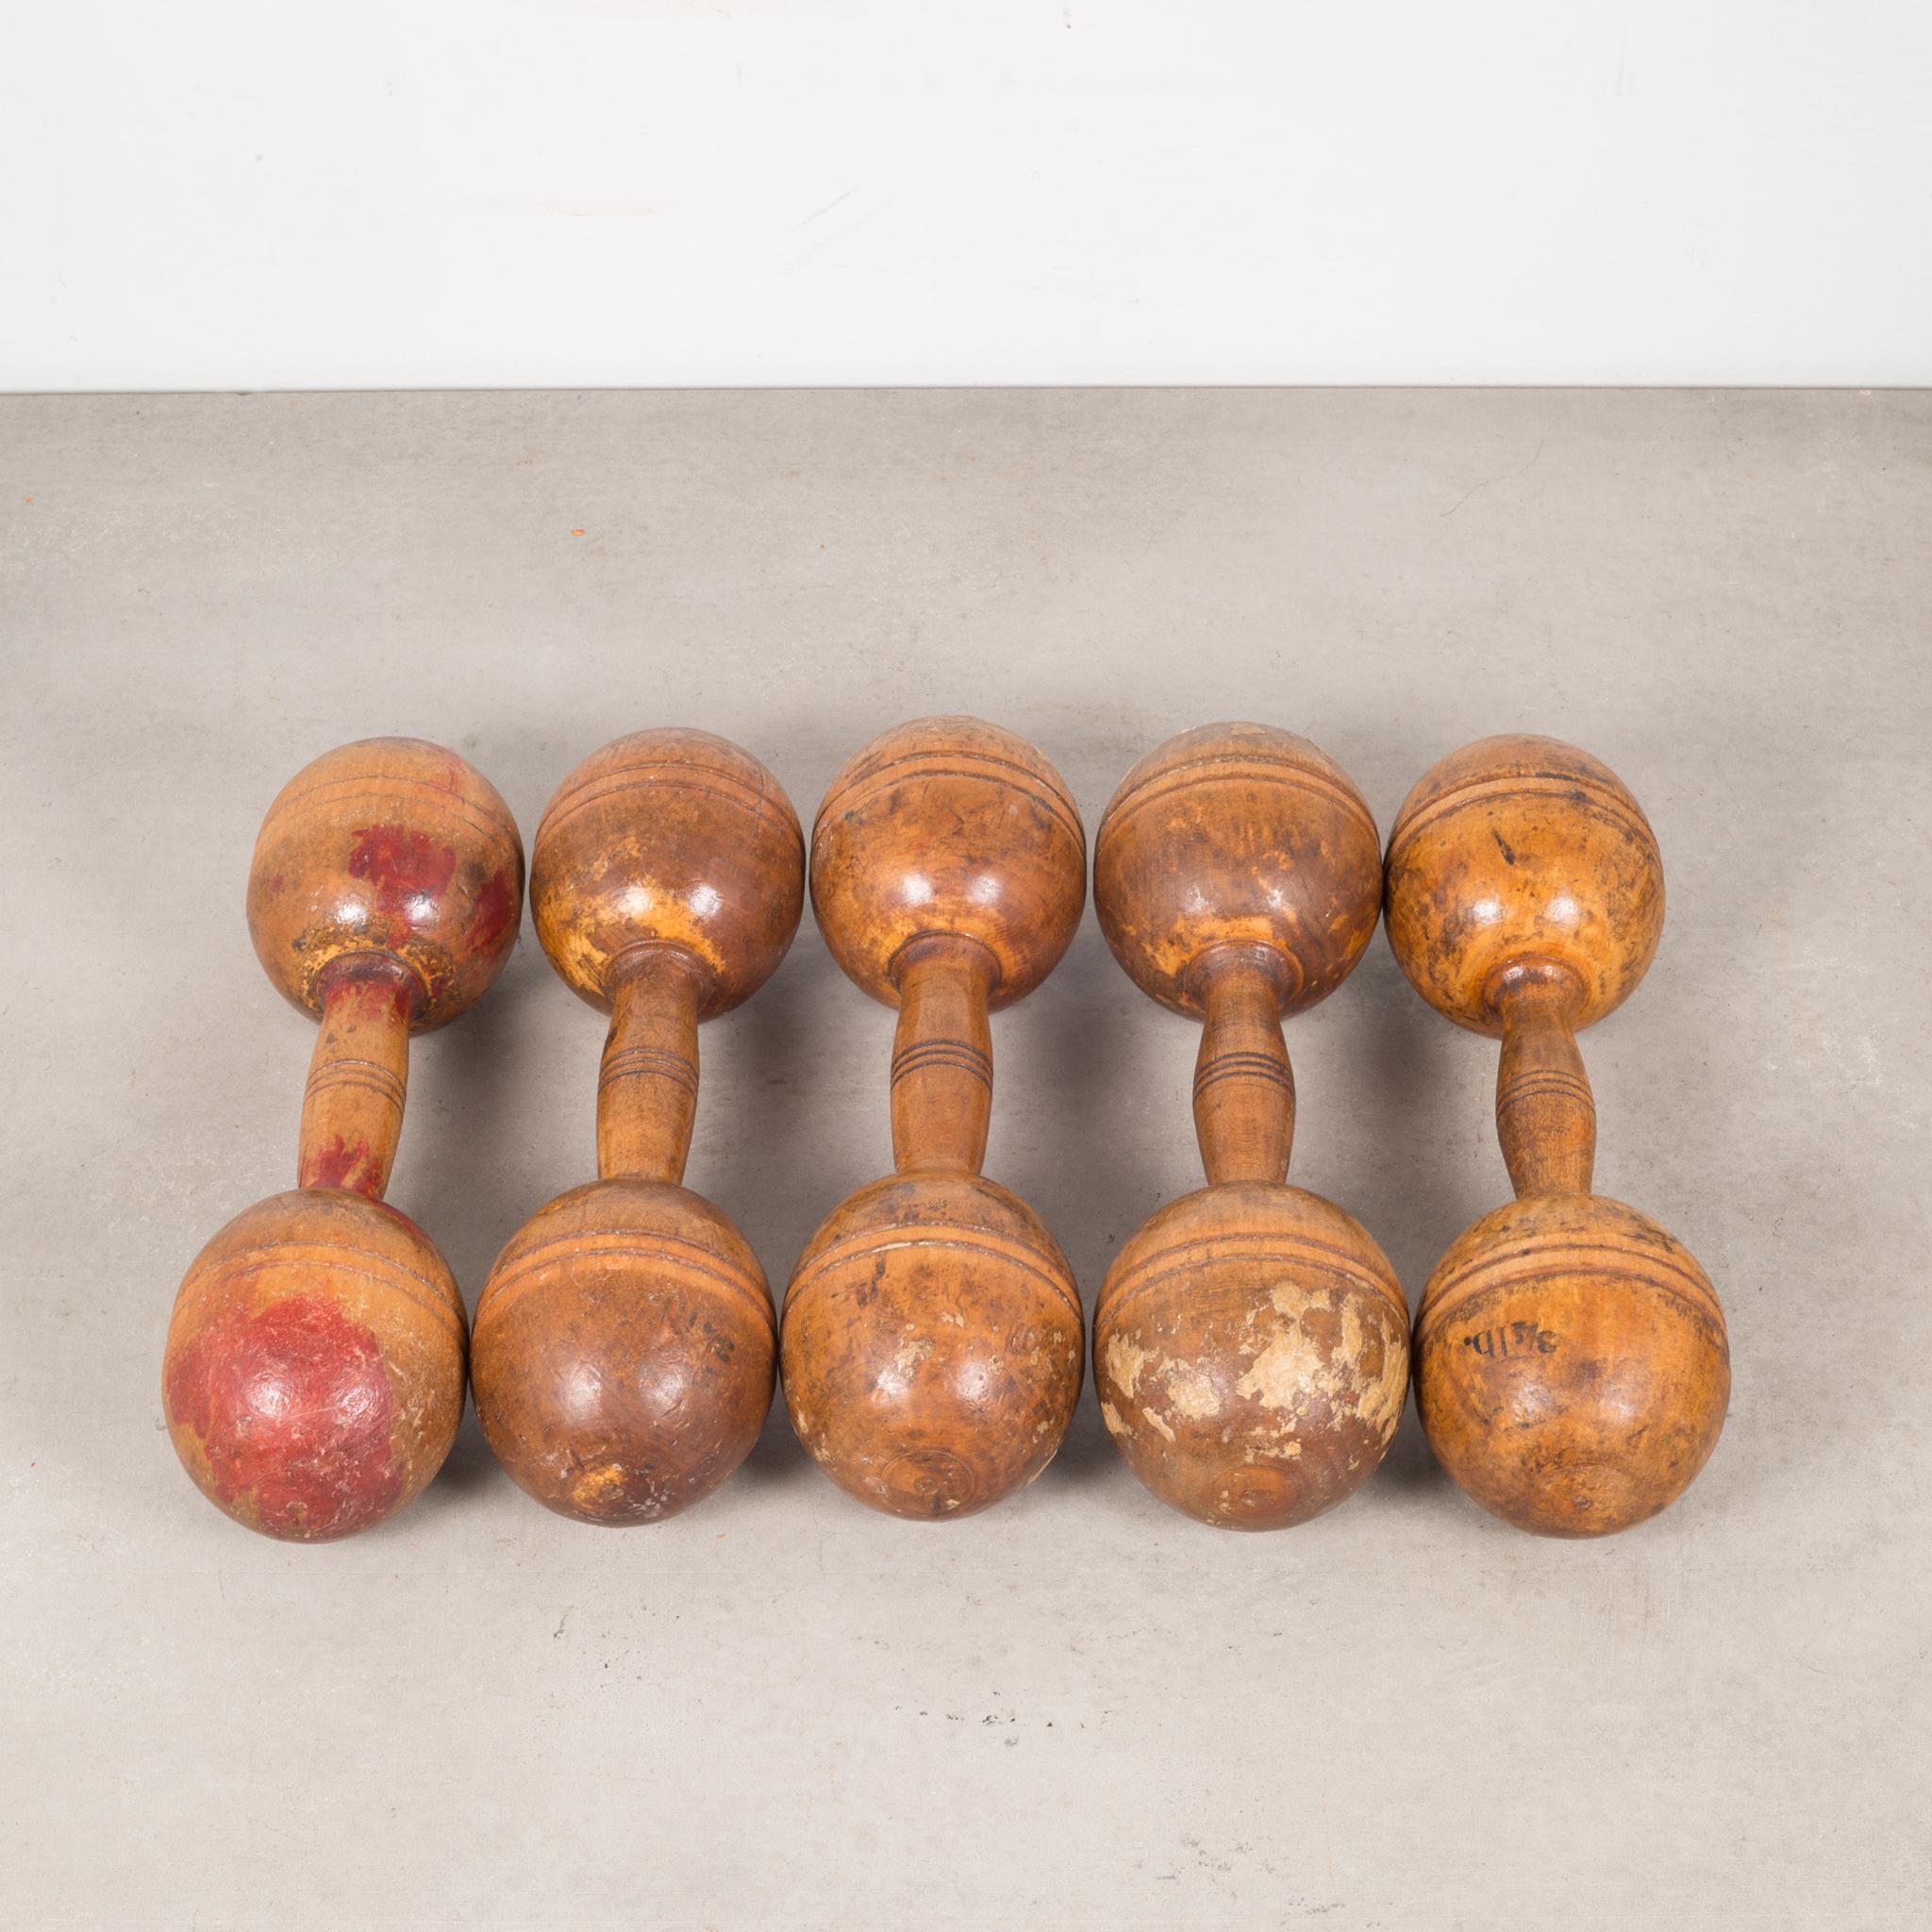 Industrial Collection of Antique Wooden Excercise Barbells, circa 1930